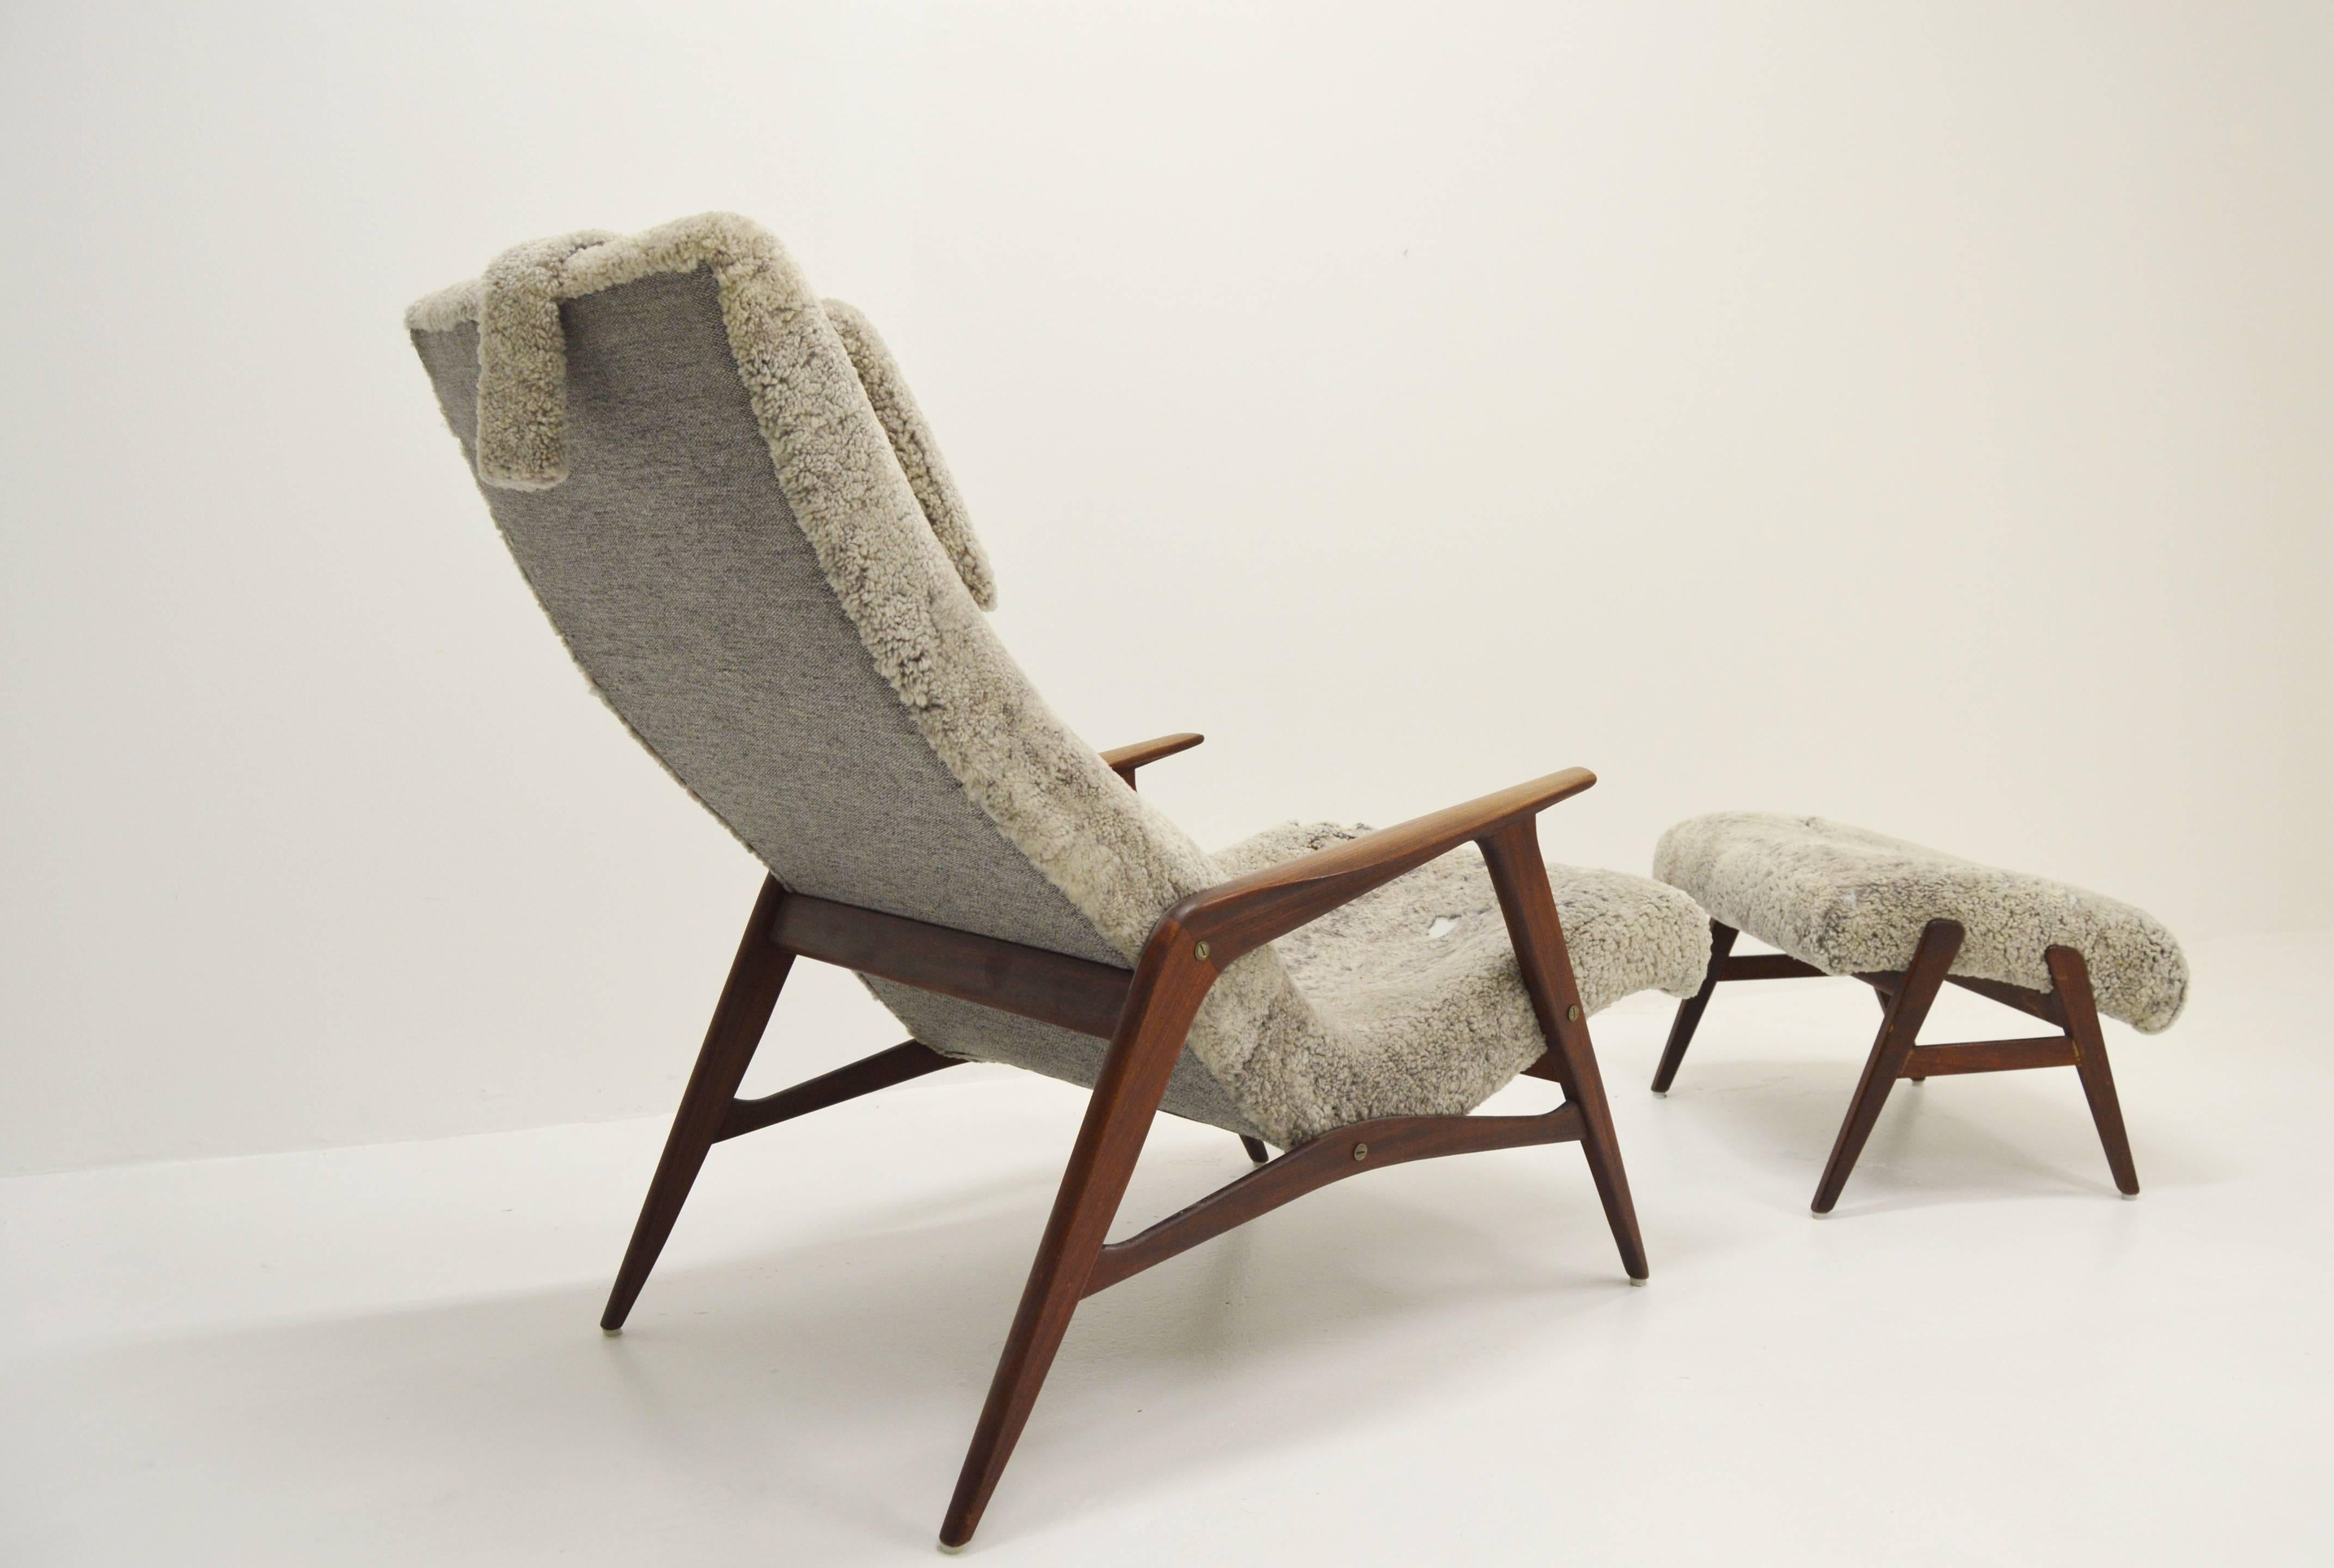 Rare lounge chair and ottoman from Jio Möbler in Jönköping, Sweden, circa 1960.

This chair is sold as renovation object since the upholstery of sheepskin is broken and need a new upholstery. Wood frame in very good condition on the chair.
 